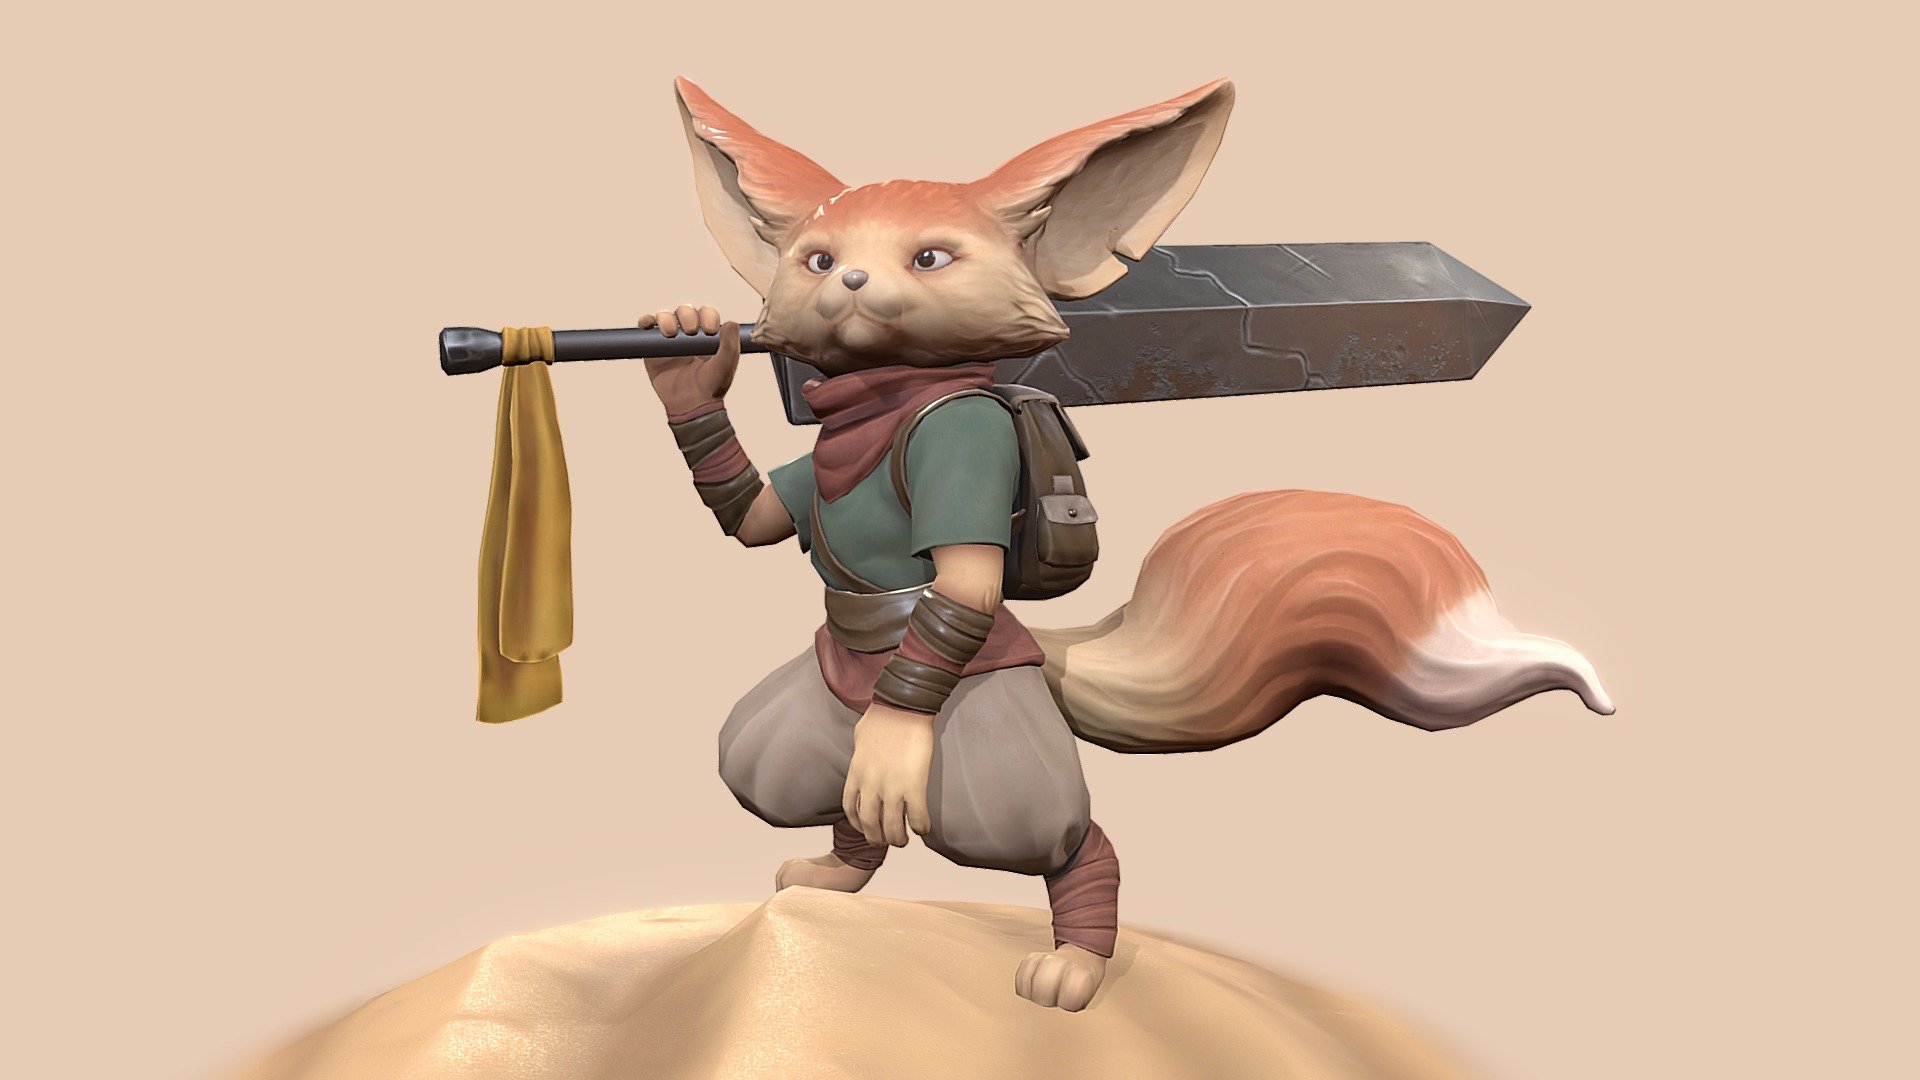 Simple Creature assignment for Stylized Creation at DAE Howest. Sculpted in Zbrush, retopologized in Maya and textured in Substance Painter.

Based on concept art by Pablo Ilyich - Fennec Fox Adventurer - Stylized Creature - 3D model by roksolana.khrouchtch 3d model